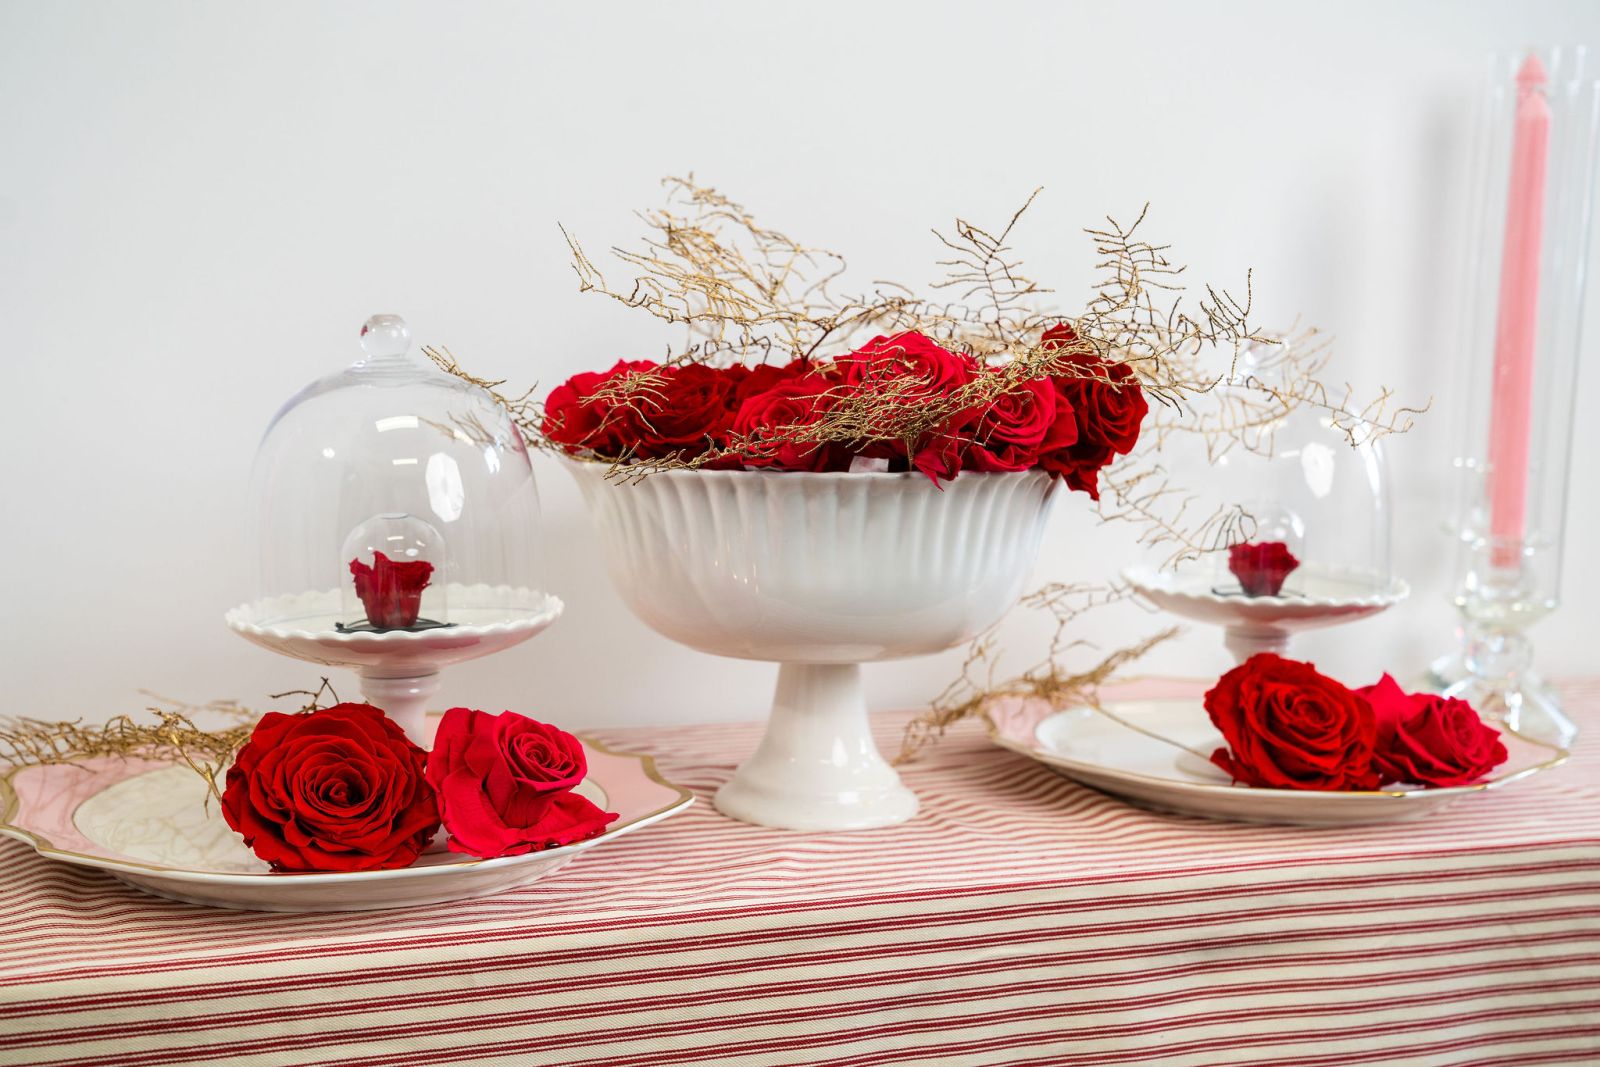 Picture of preserved roses used in Valentine's Day setting, by Flynn Graham from Wildkinds Studio.